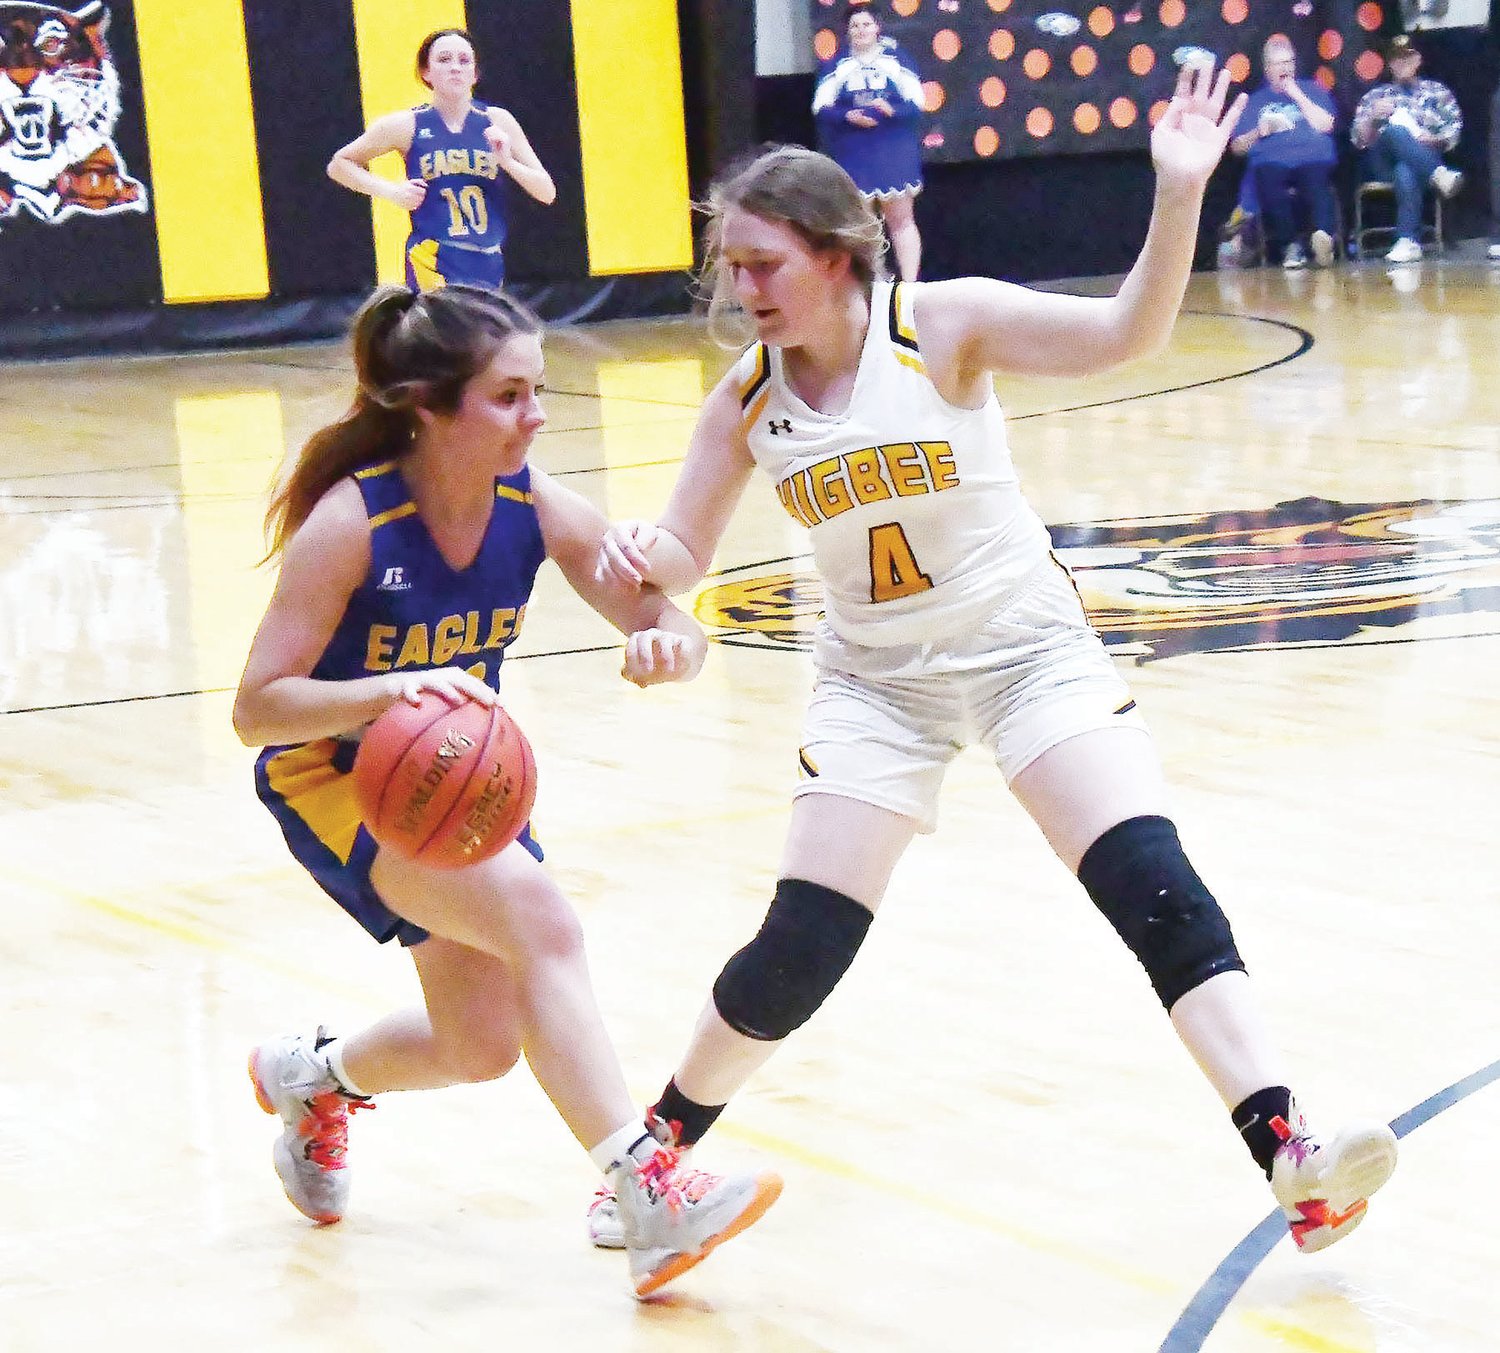 Emma Johnson (4) defends during a Carroll Livingston Activities Association girls basketball game versus Northwestern (Mendon) on Friday, Jan. 13. The Tigers defeated the Eagles, 75-28.